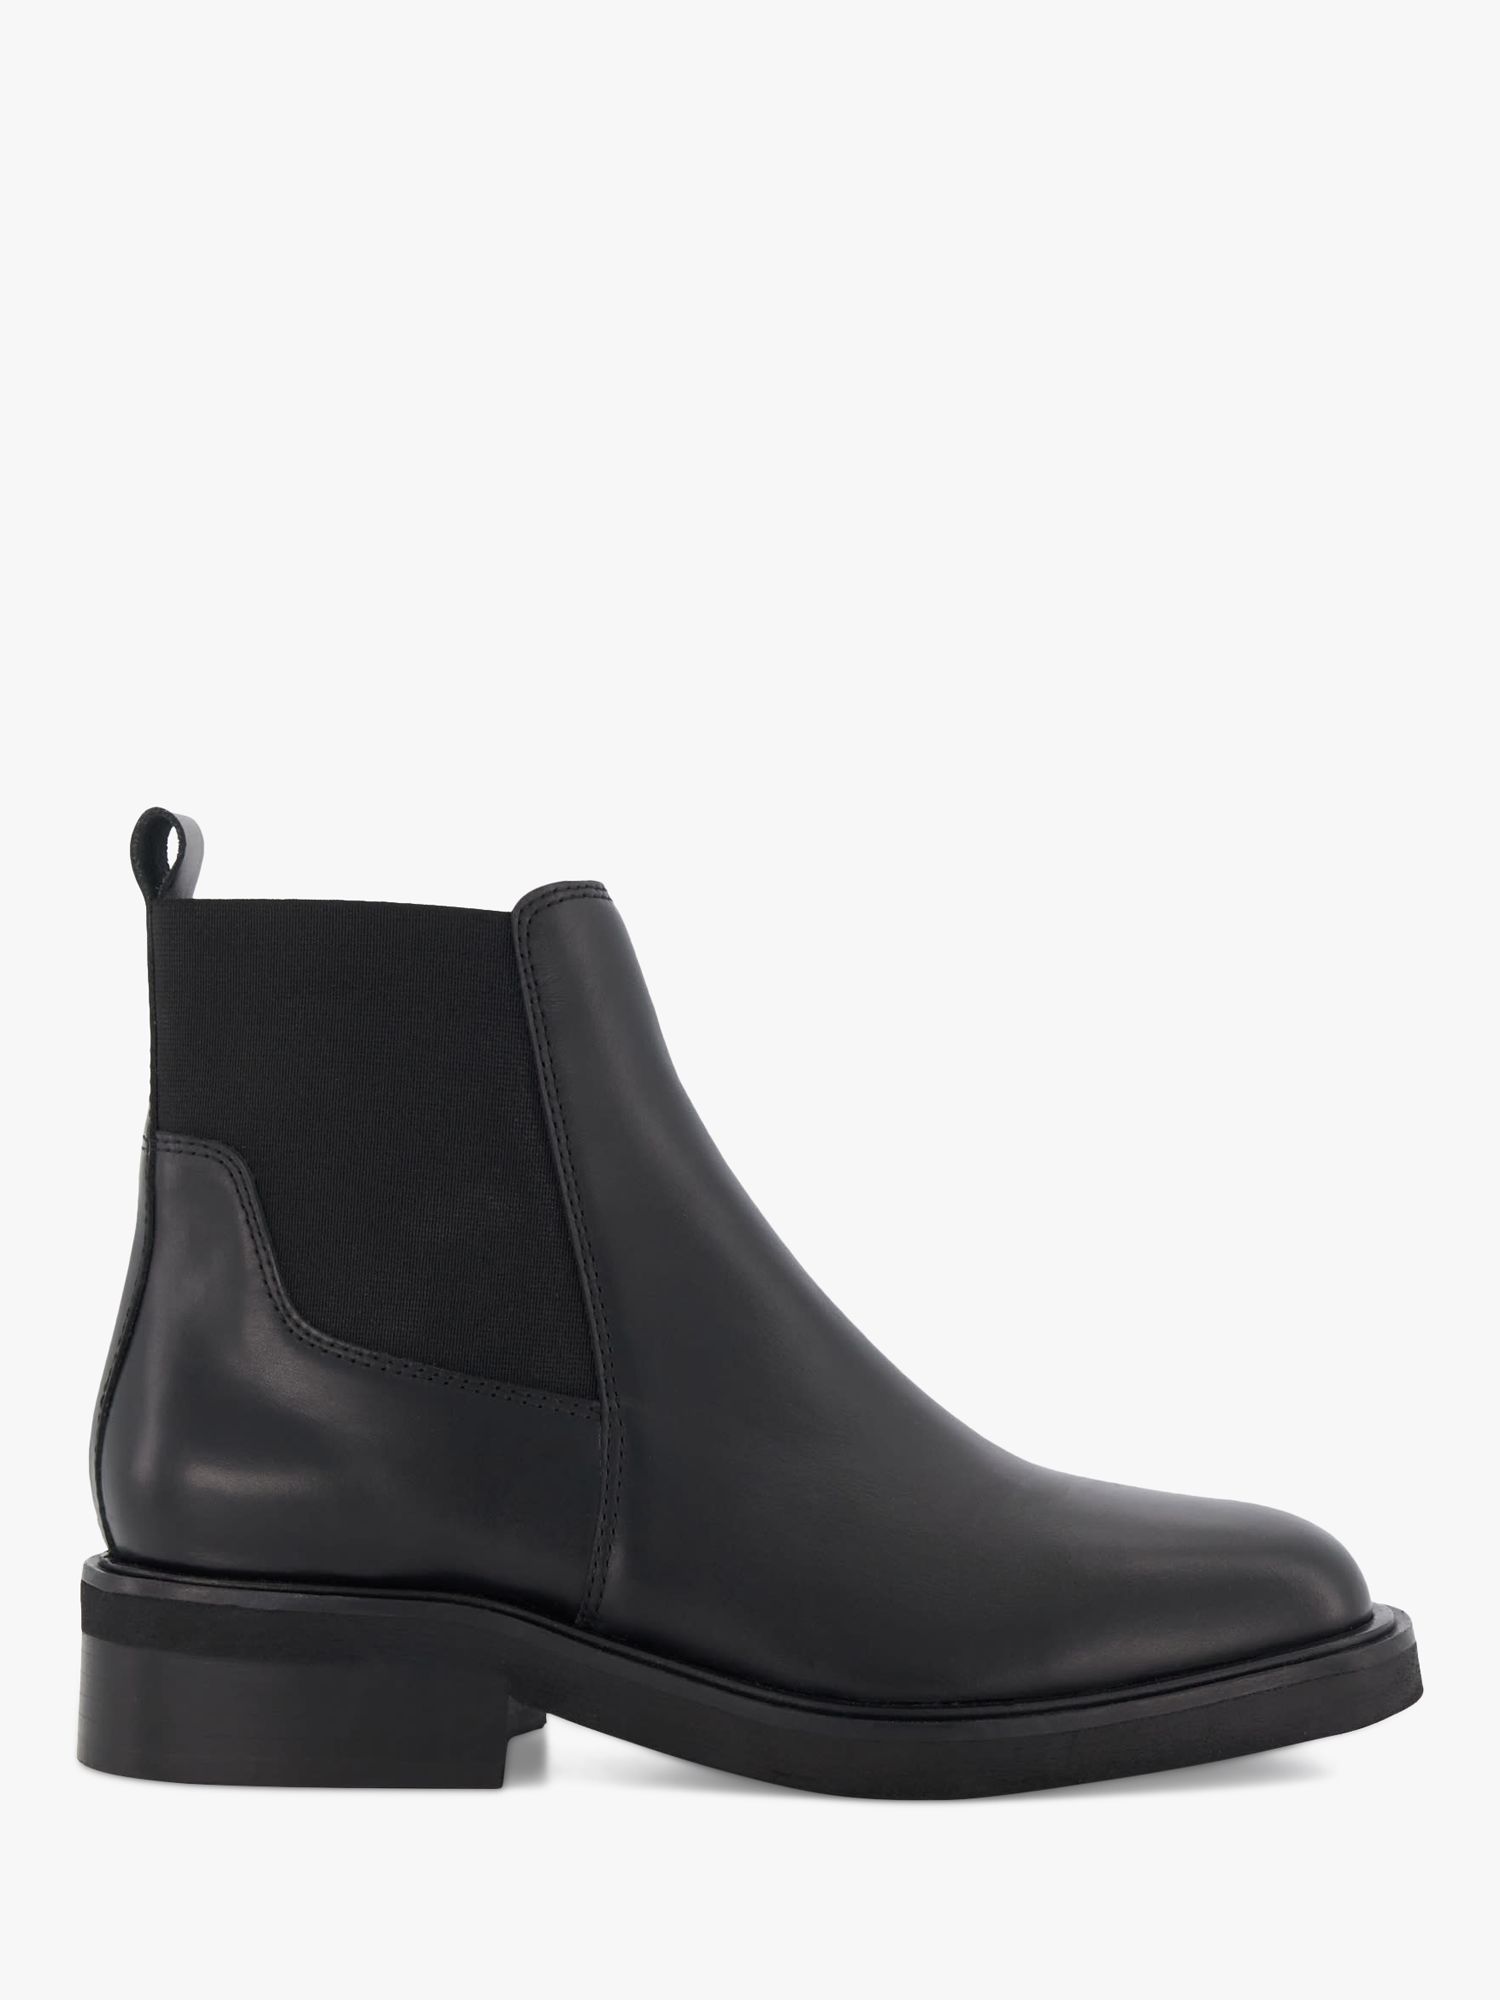 Dune Penney Leather Chelsea Boots, Black